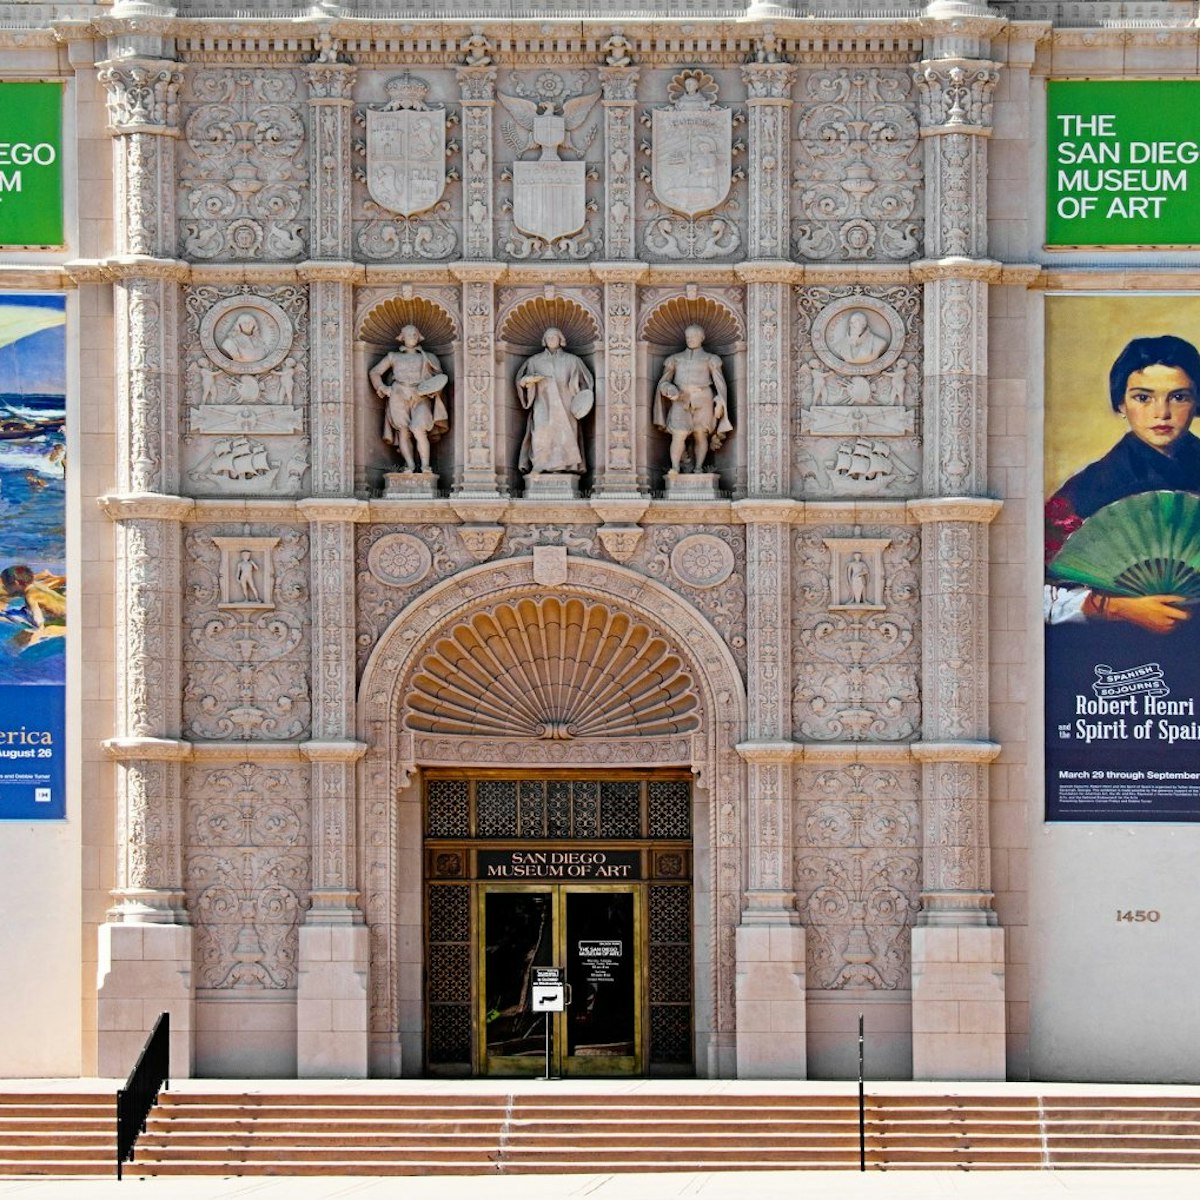 San Diego, USA- June 11, 2014: The San Diego Museum of Art is a fine arts museum located in Balboa Park in San Diego. The museum building was designed in a plateresque style to harmonize with existing structures from the Panama–California Exposition of 1915. The dominant feature of the facade is a heavily ornamented door inspired by a doorway at the University of Salamanca.